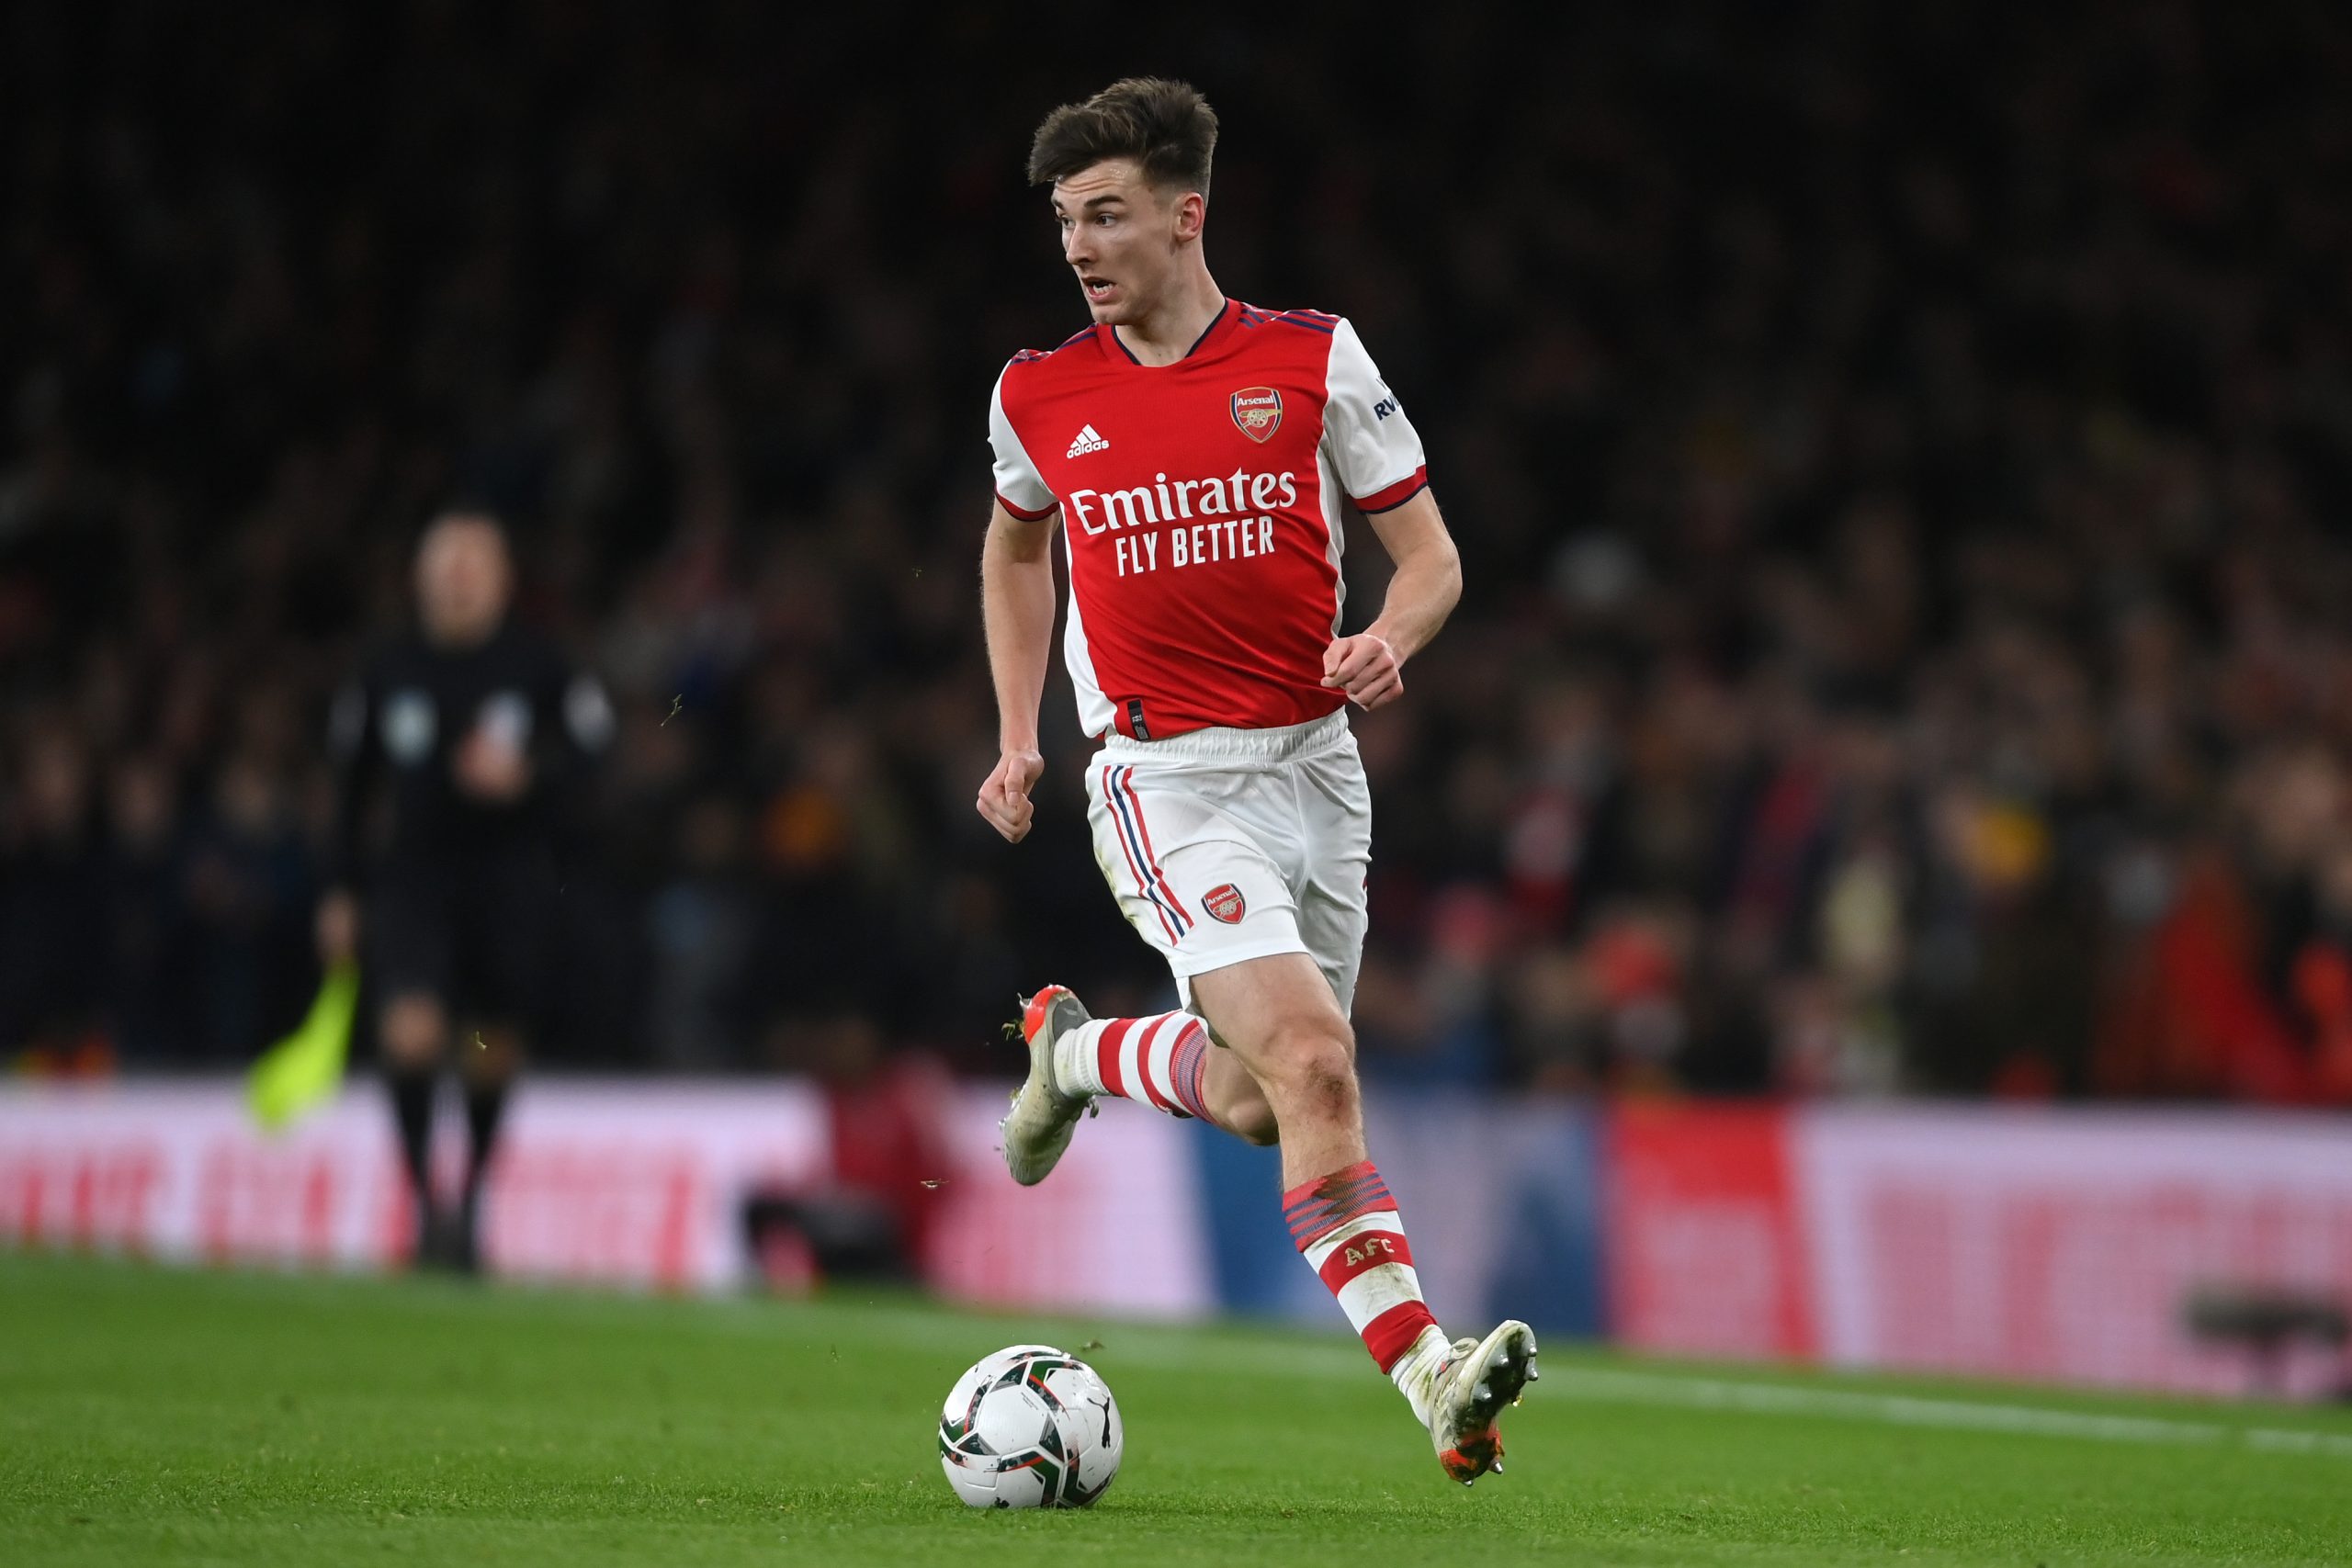 Arsenal's Kieran Tierney is now a target for Liverpool